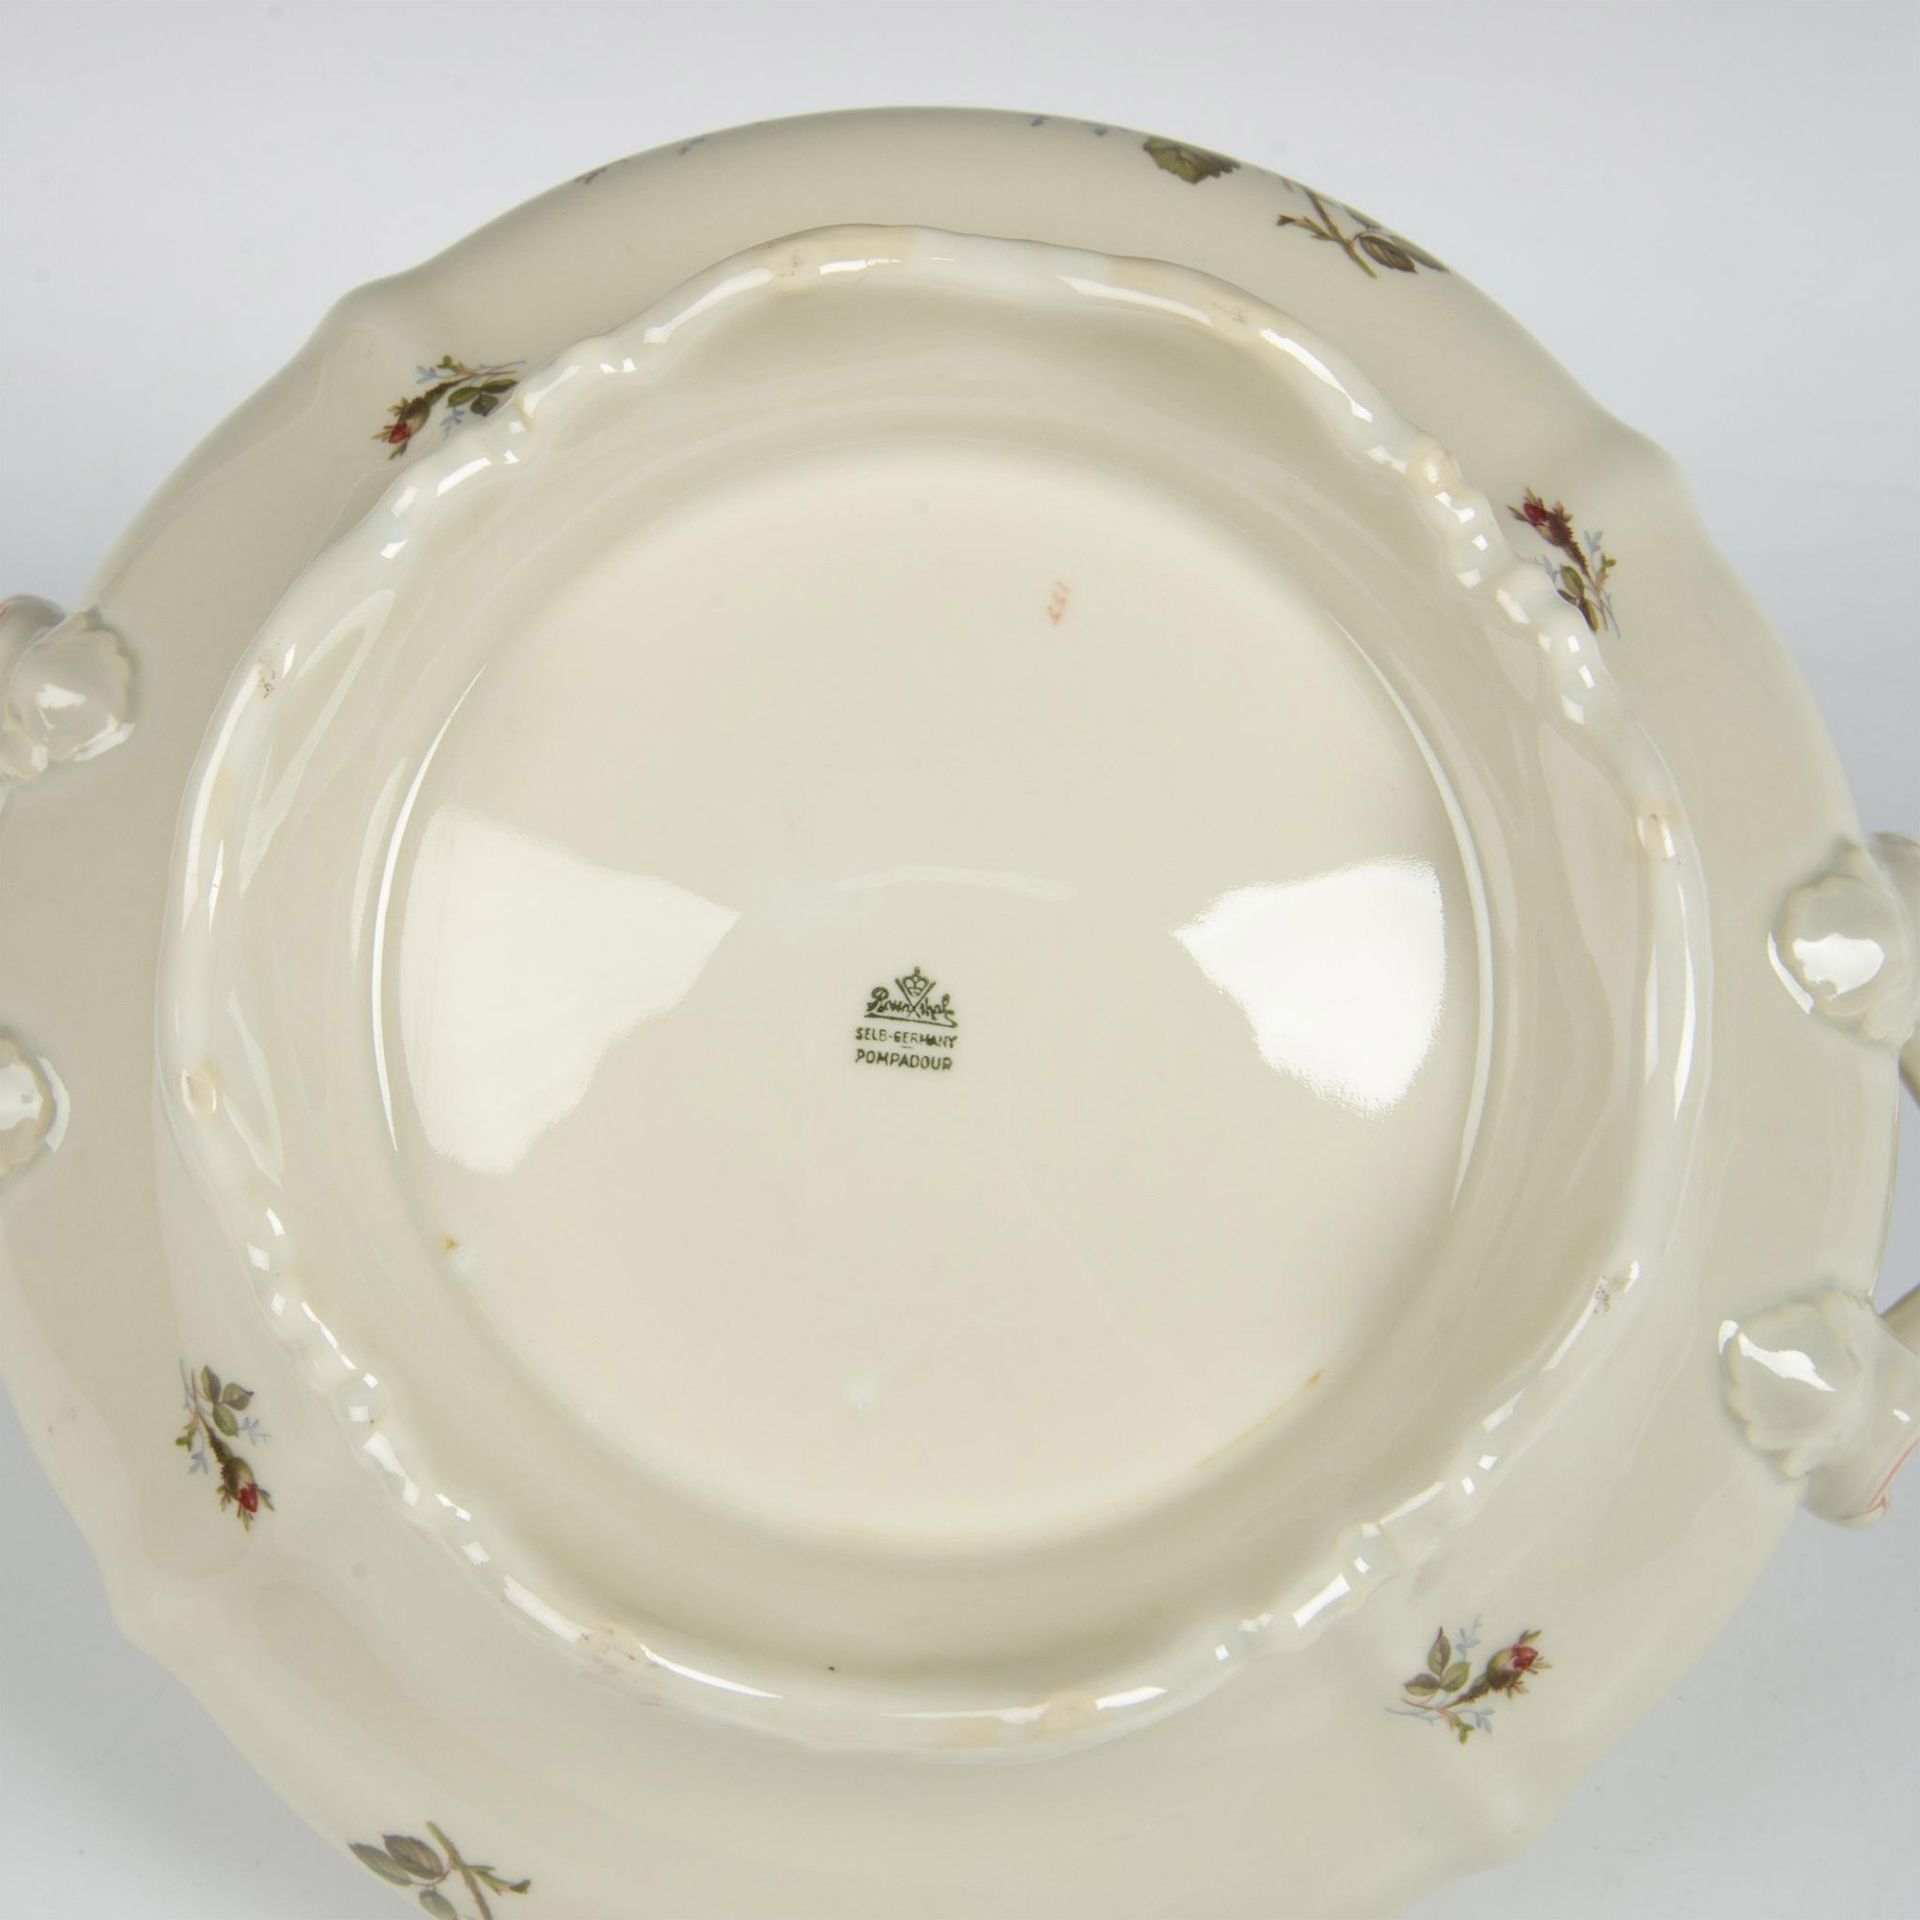 Rosenthal Selb-Germany Pompadour Moss Rose Tureen - Image 4 of 4